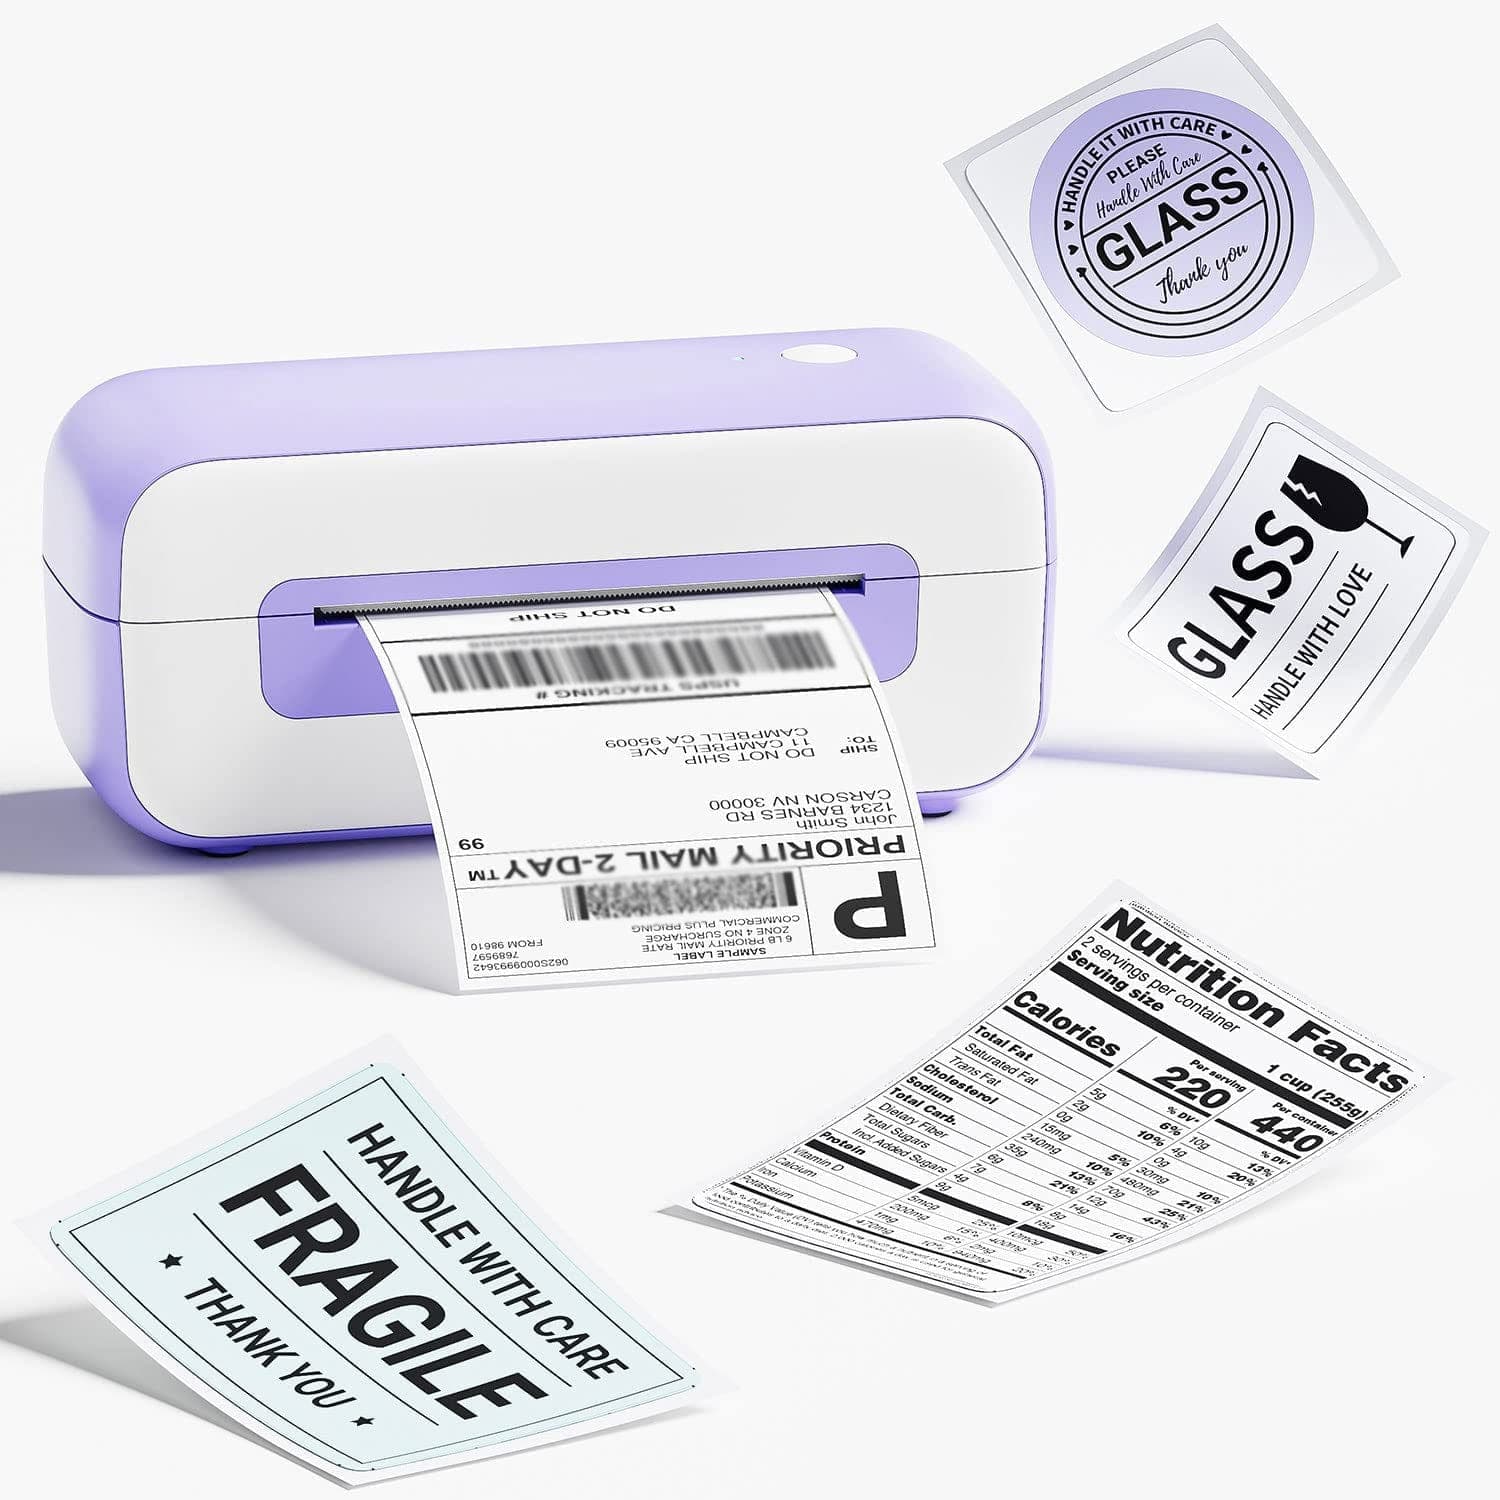 Review of the Phomemo Ponek Pm-246s Shipping Label Printer